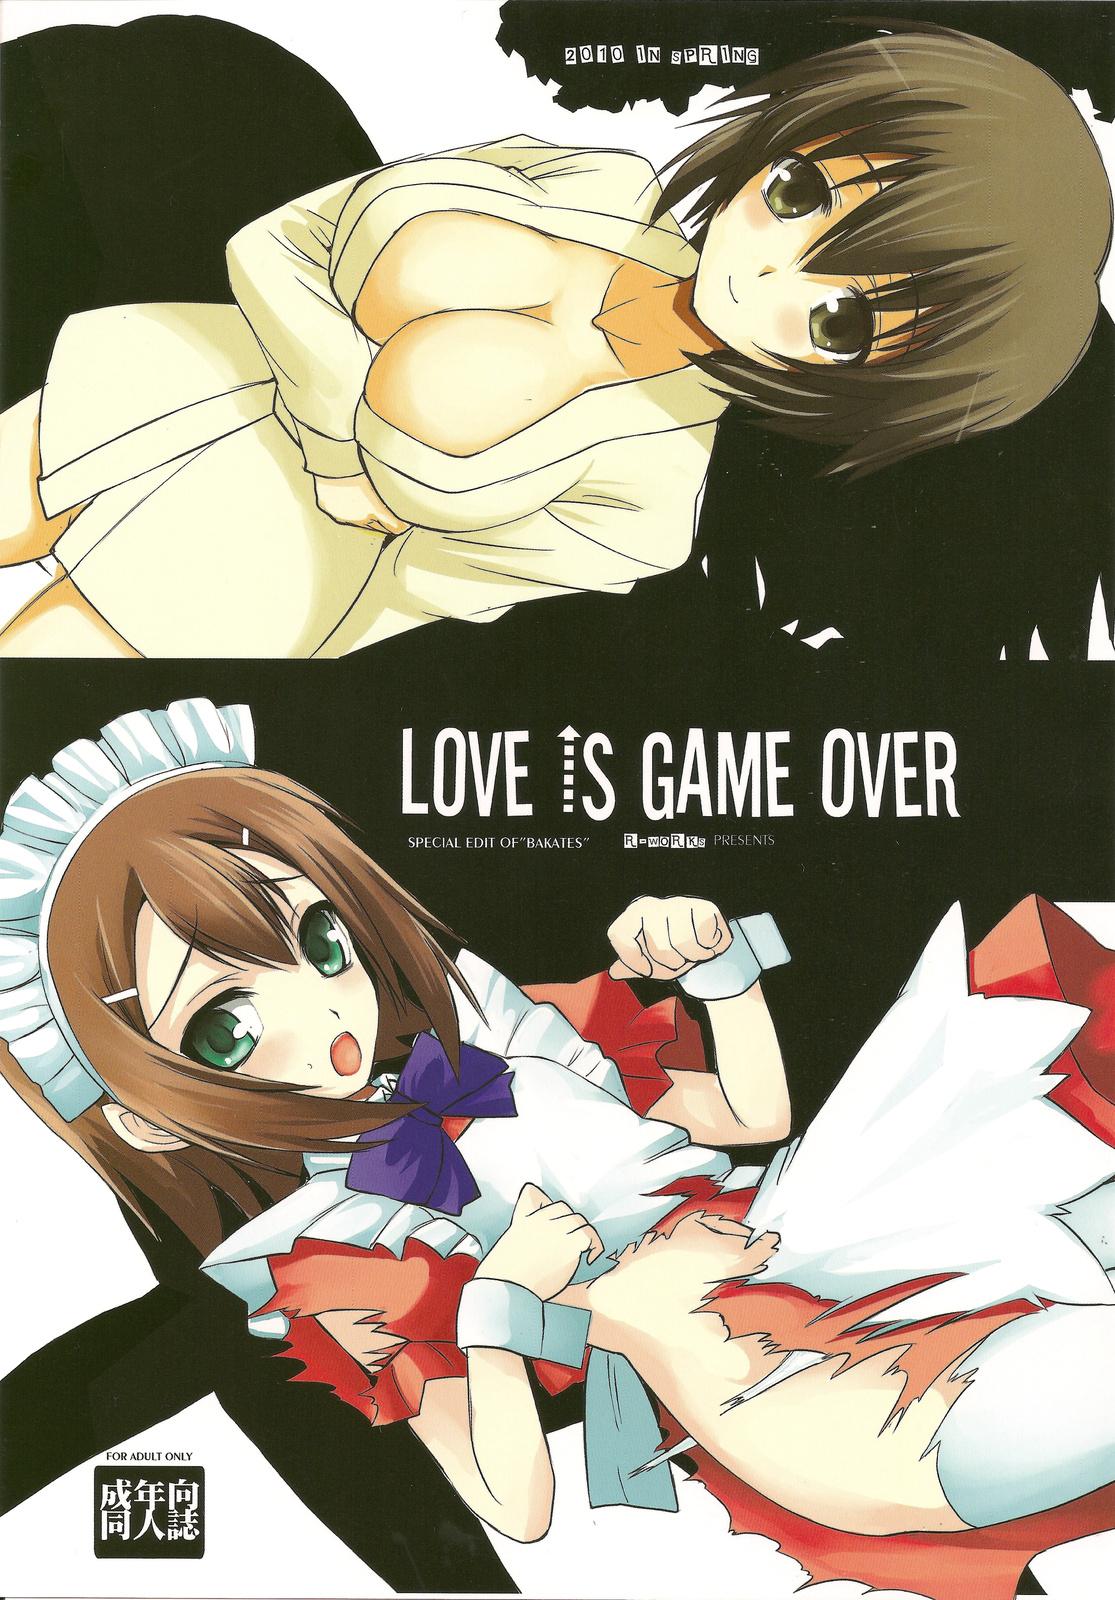 Tribbing LOVE IS GAME OVER - Baka to test to shoukanjuu Stepsis - Page 1